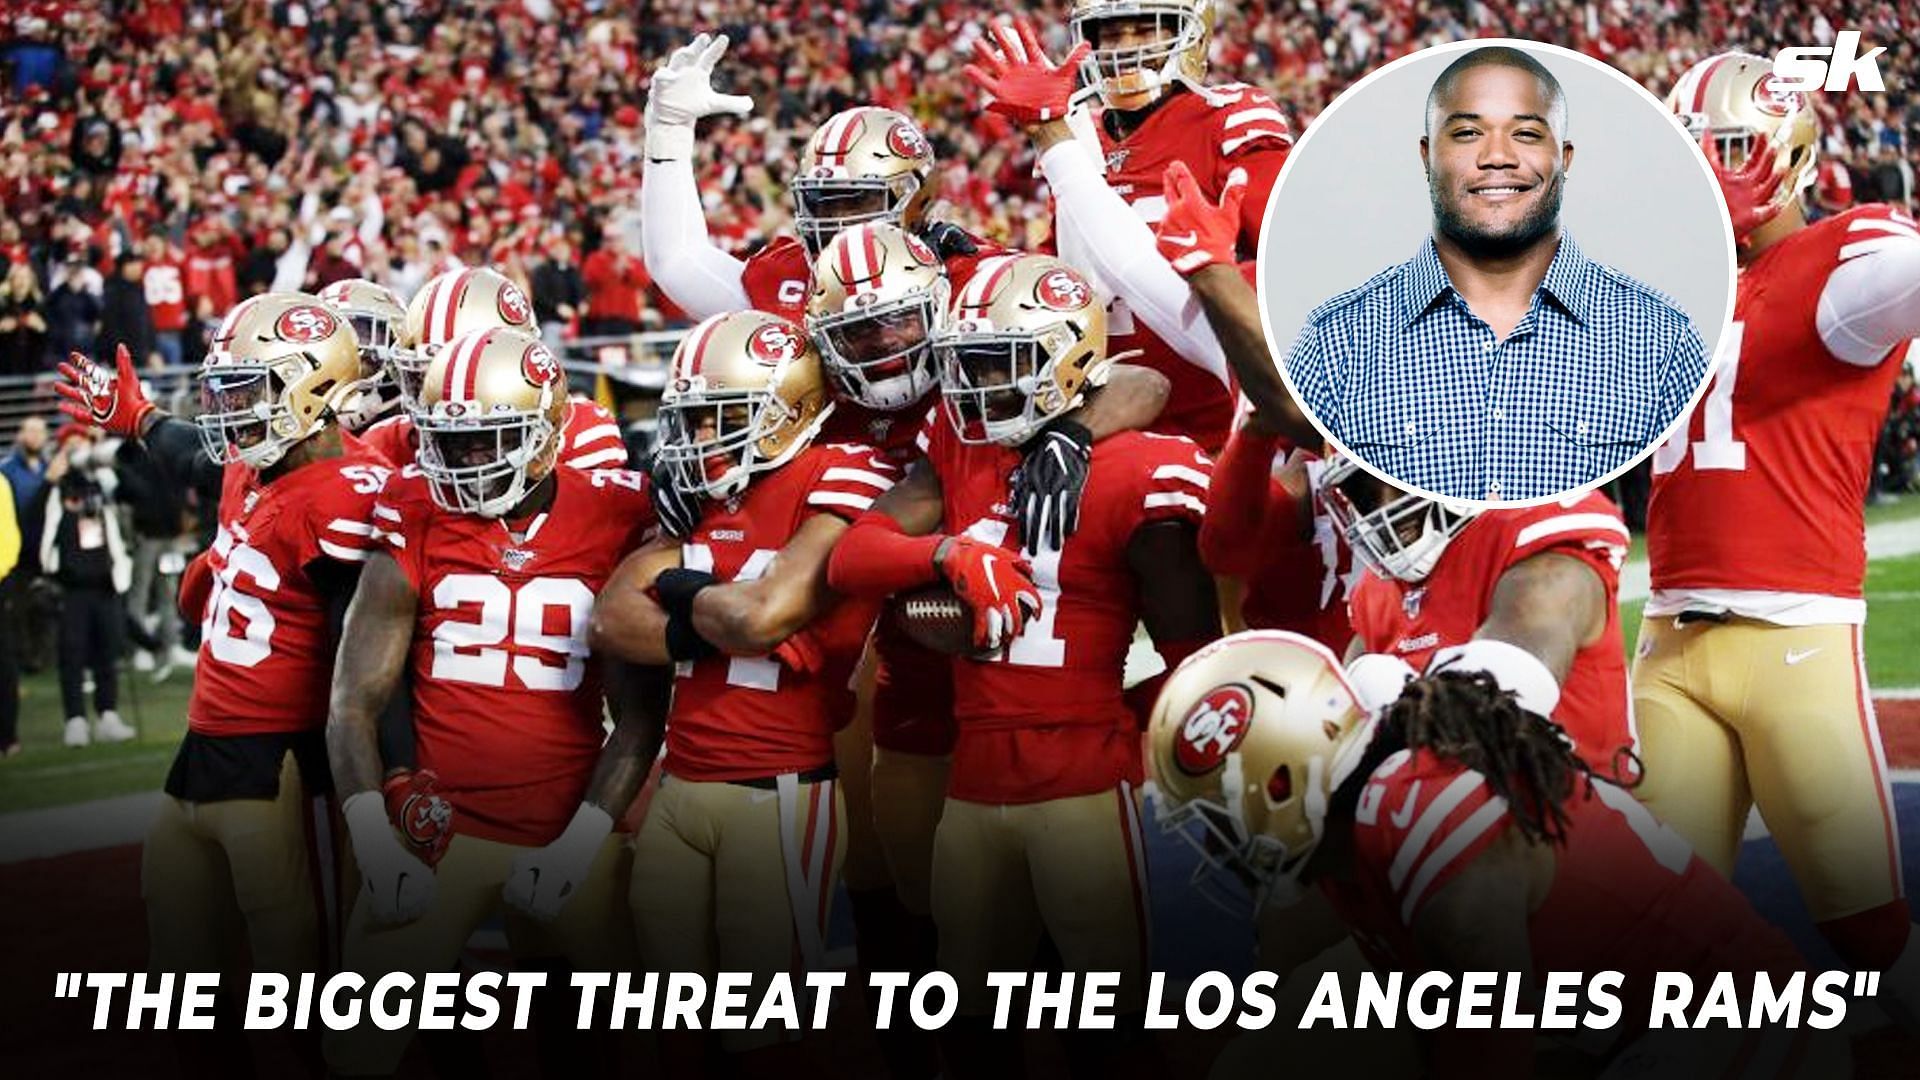 NFL analyst Michael Robinson thinks 49ers are &quot;the biggest threat to the LA Rams&quot;